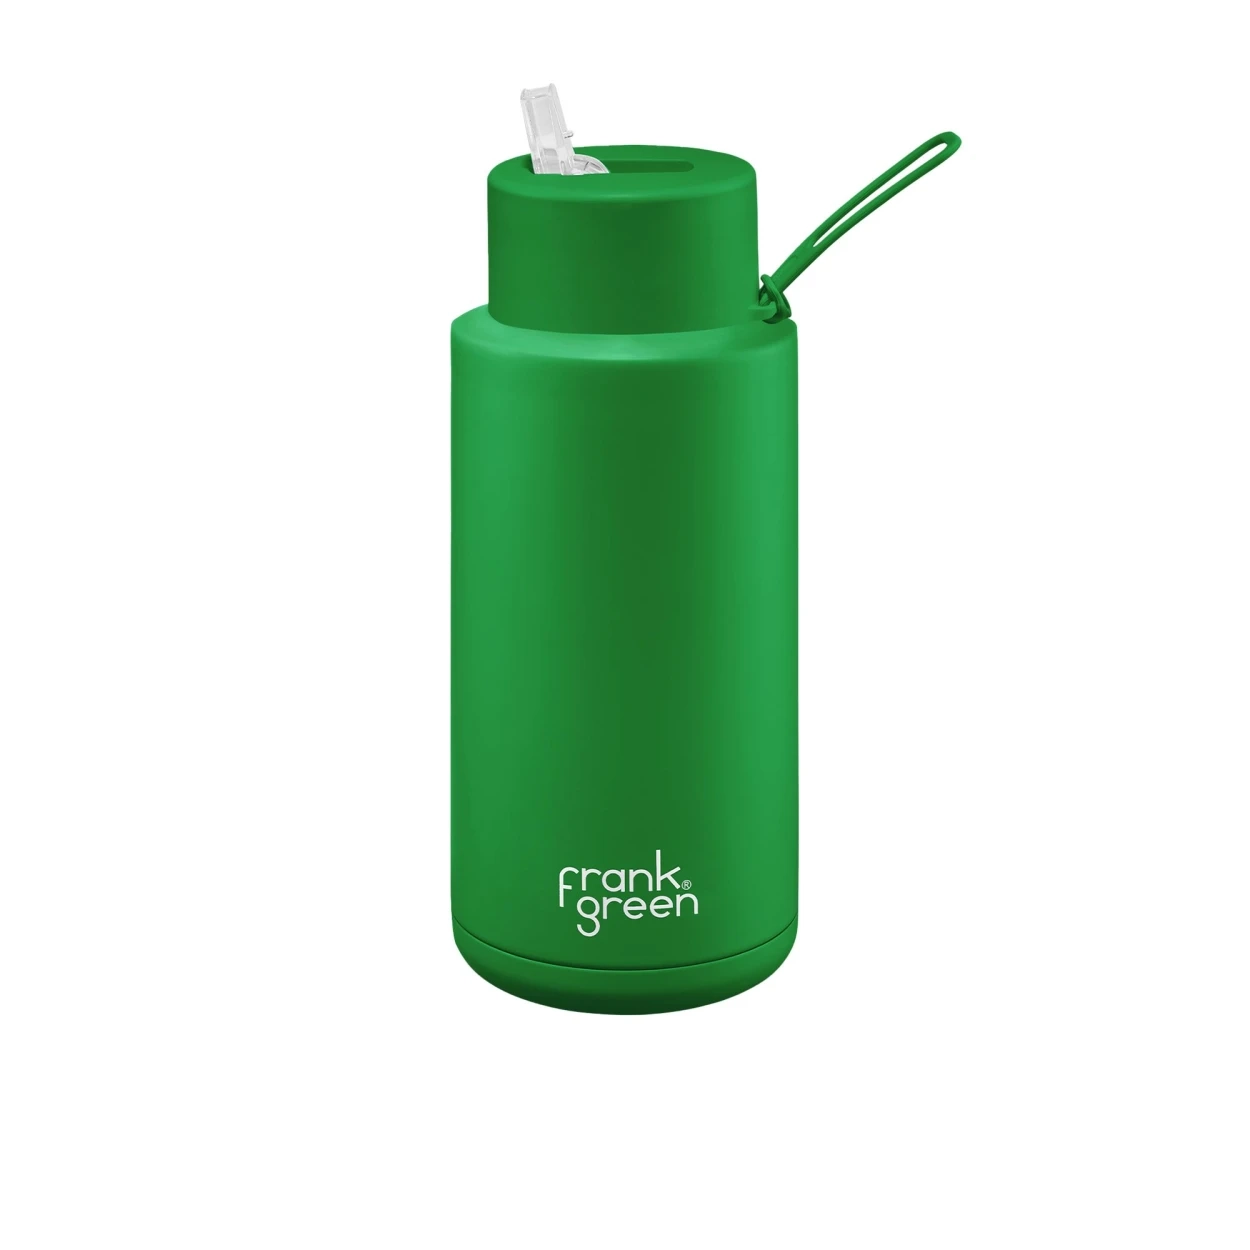 Frank Green Limited Edition Reusable Bottle with Straw 1L (34oz) Evergreen Image 1